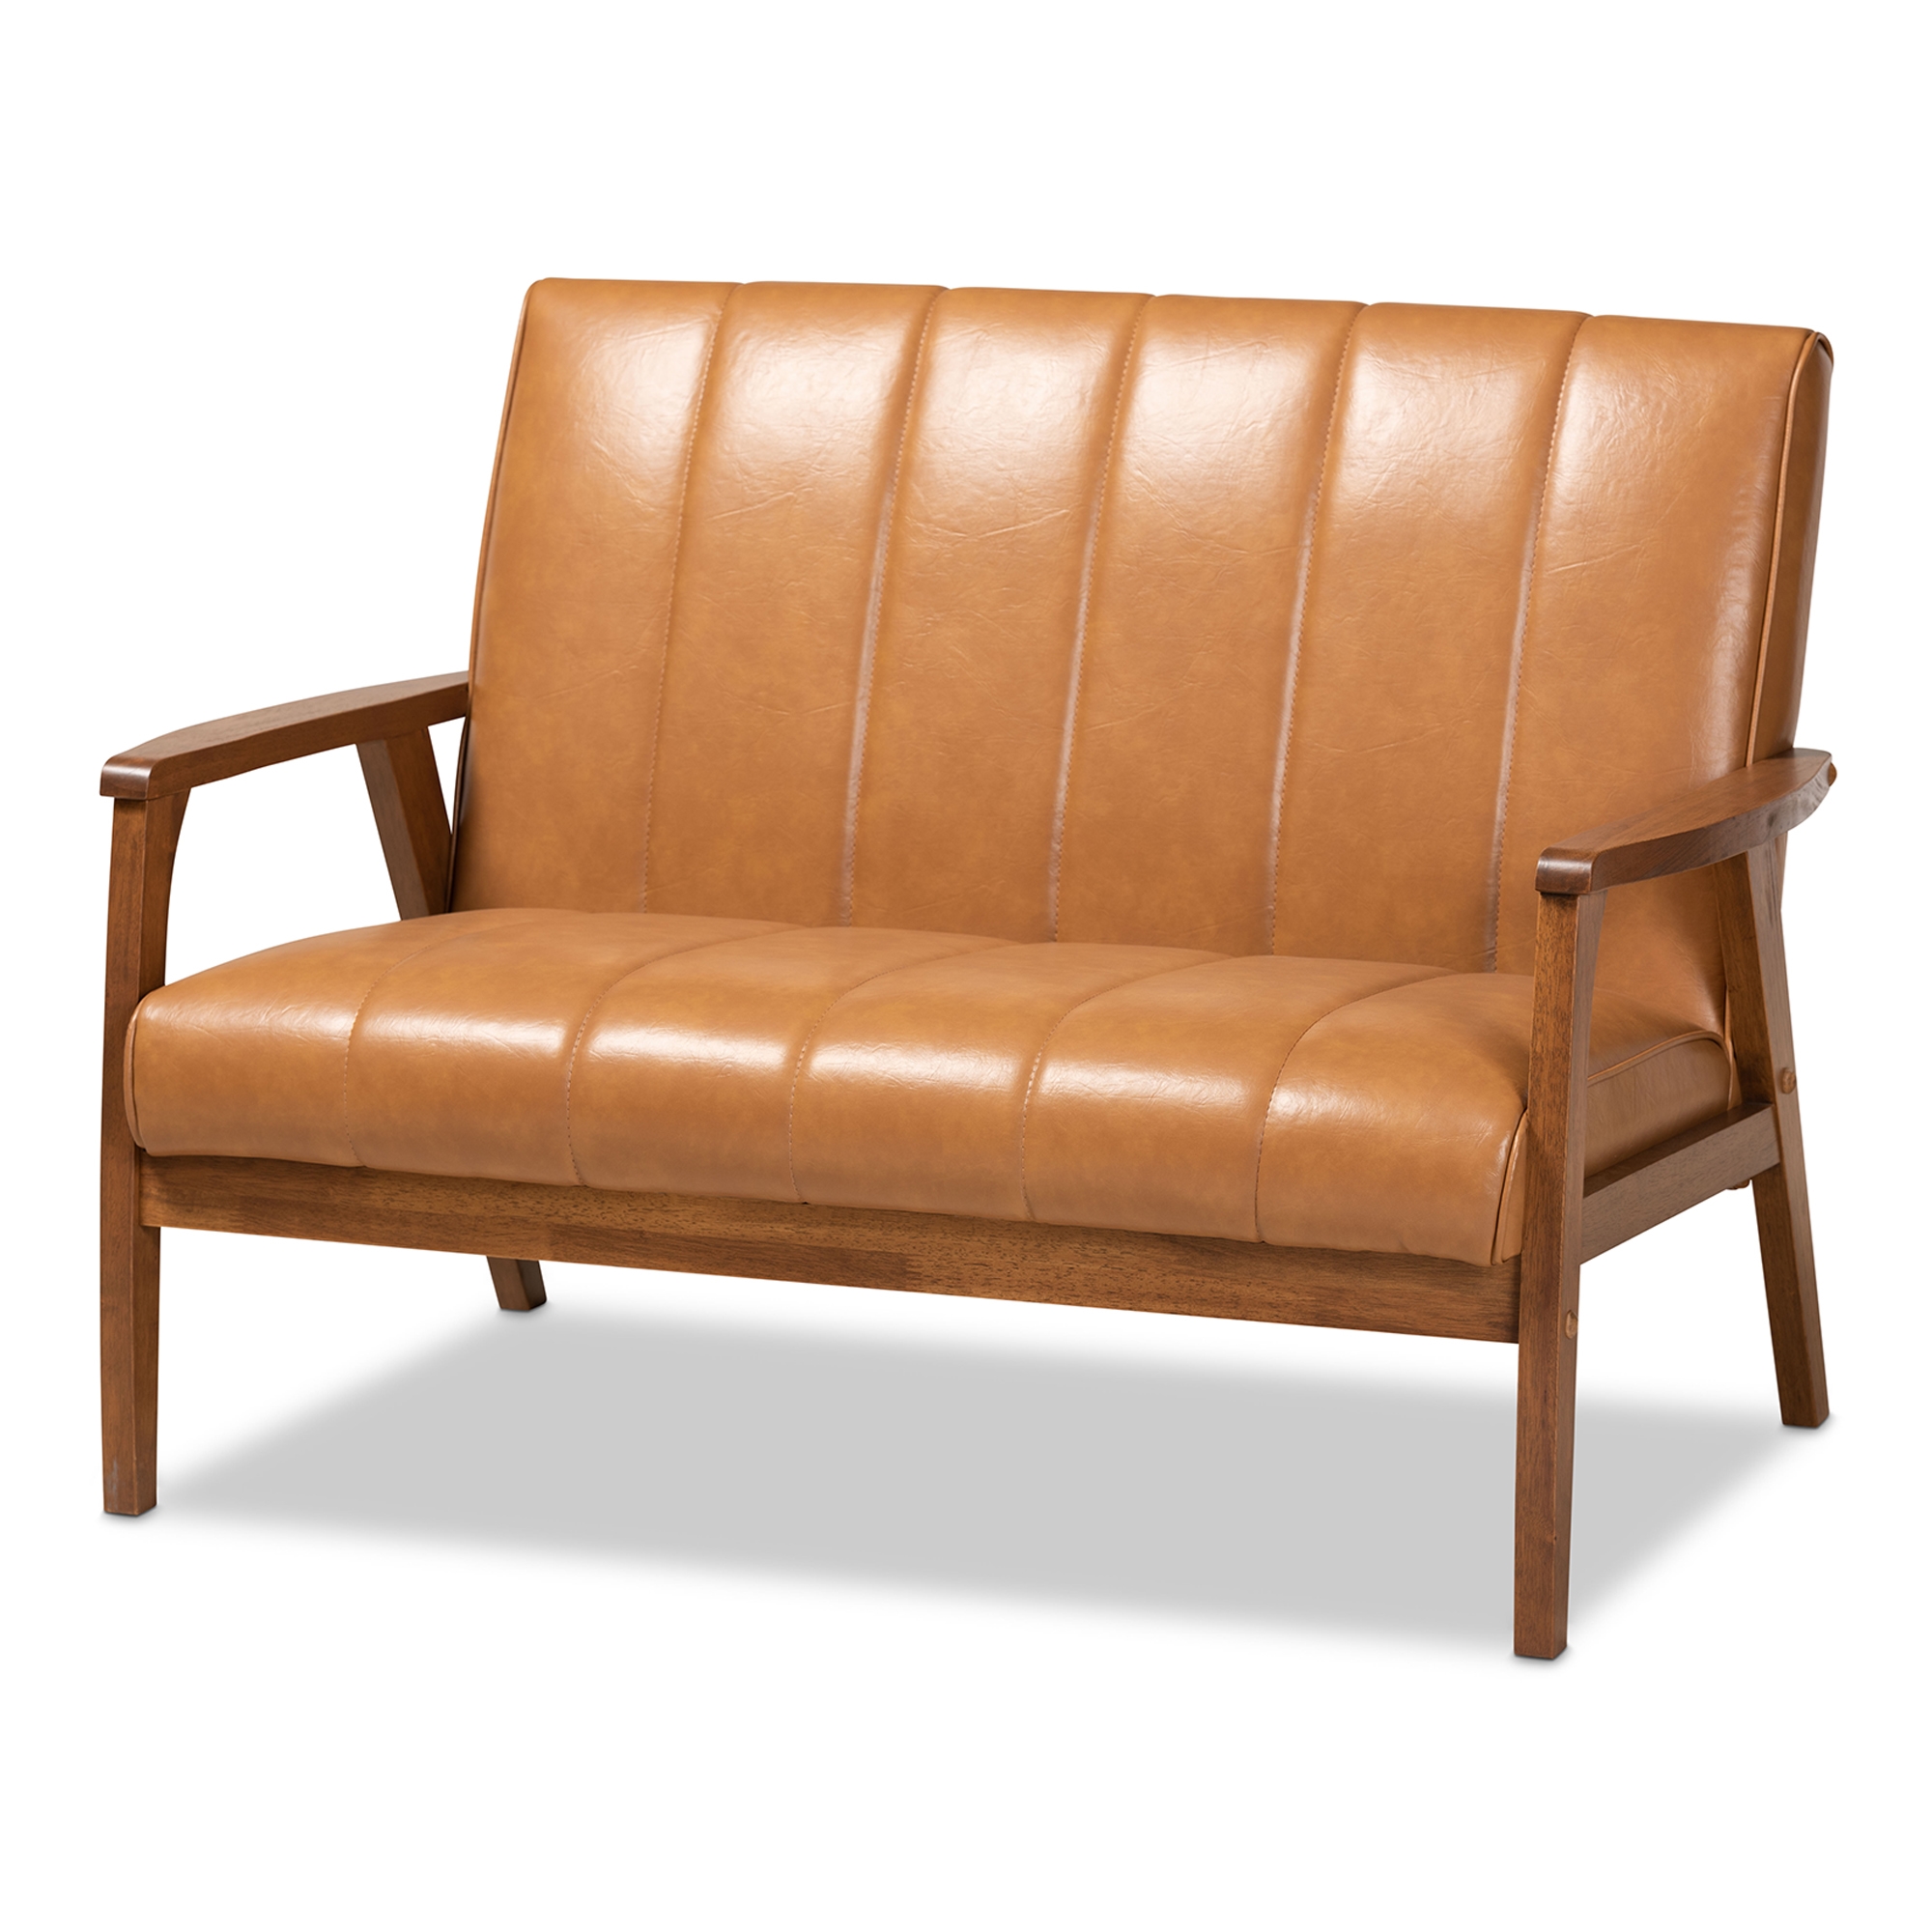 Baxton Studio Nikko Mid-century Modern Tan Faux Leather Upholstered and Walnut Brown finished Wood Loveseat